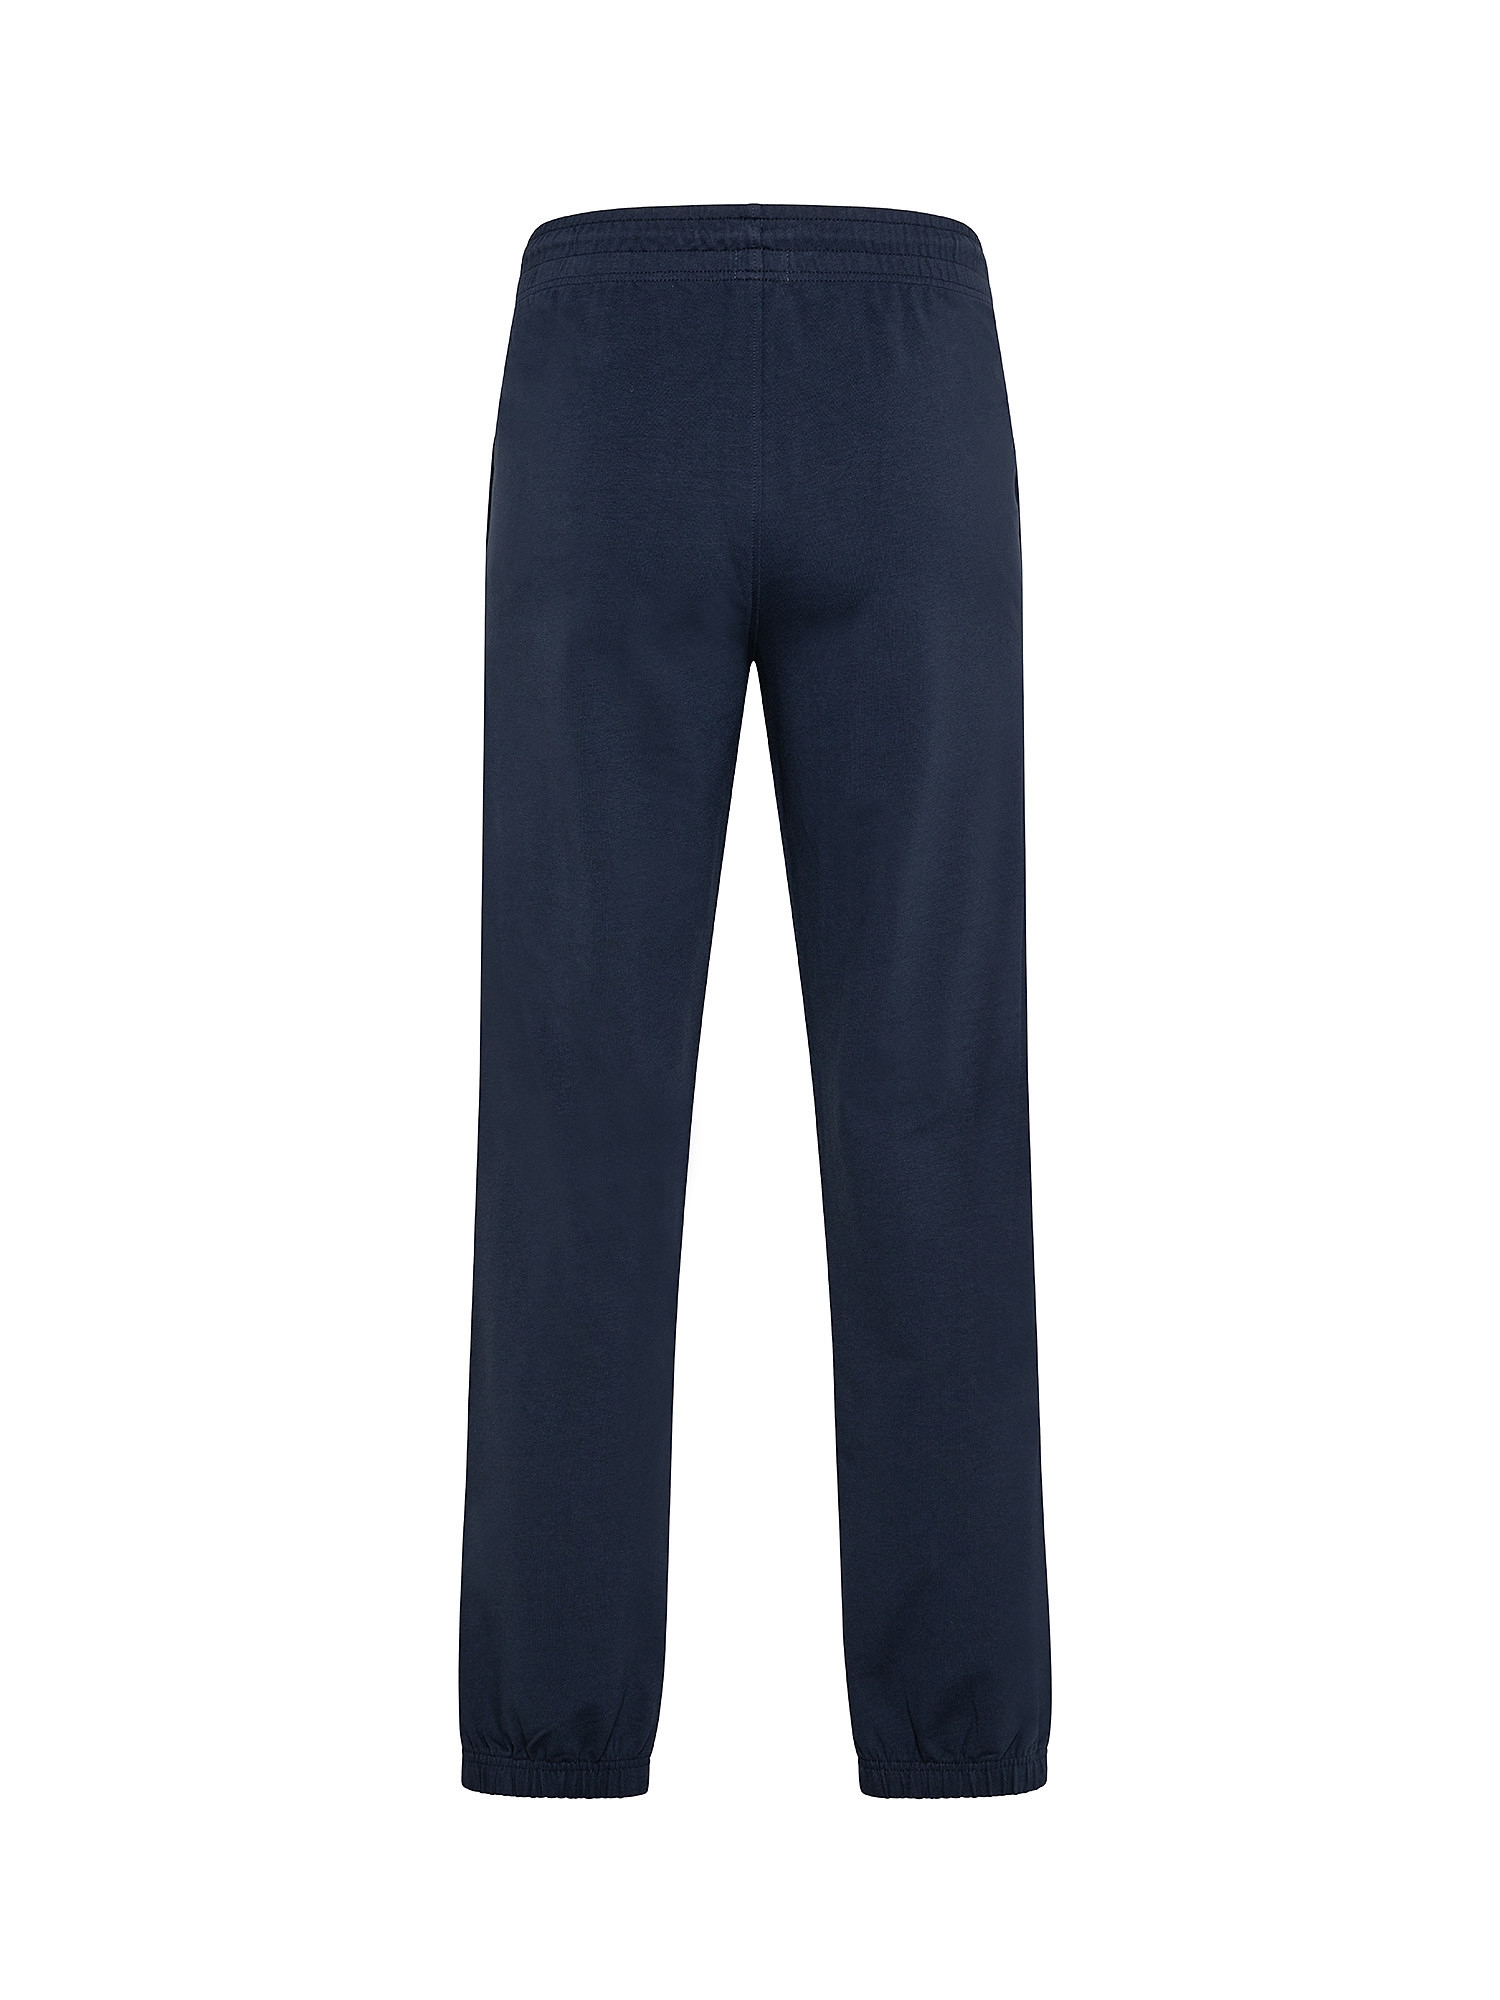 Fleece trousers, Blue, large image number 1